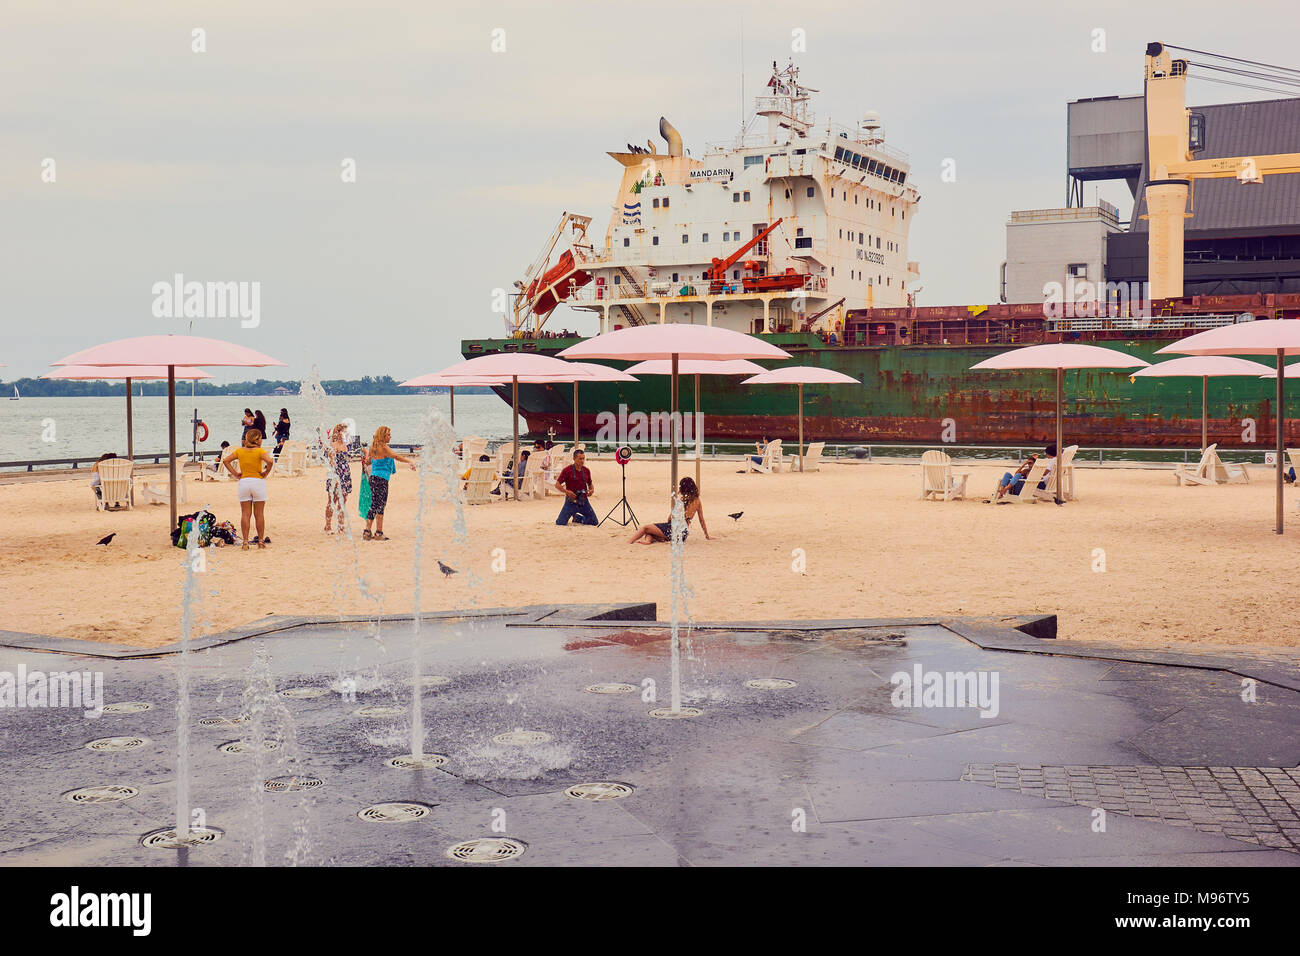 Pink umbrellas and holidaymakers on urban beach next to Lake Ontario with bulk cargo carrier Mandarin in the background, Toronto, Ontario, Canada Stock Photo